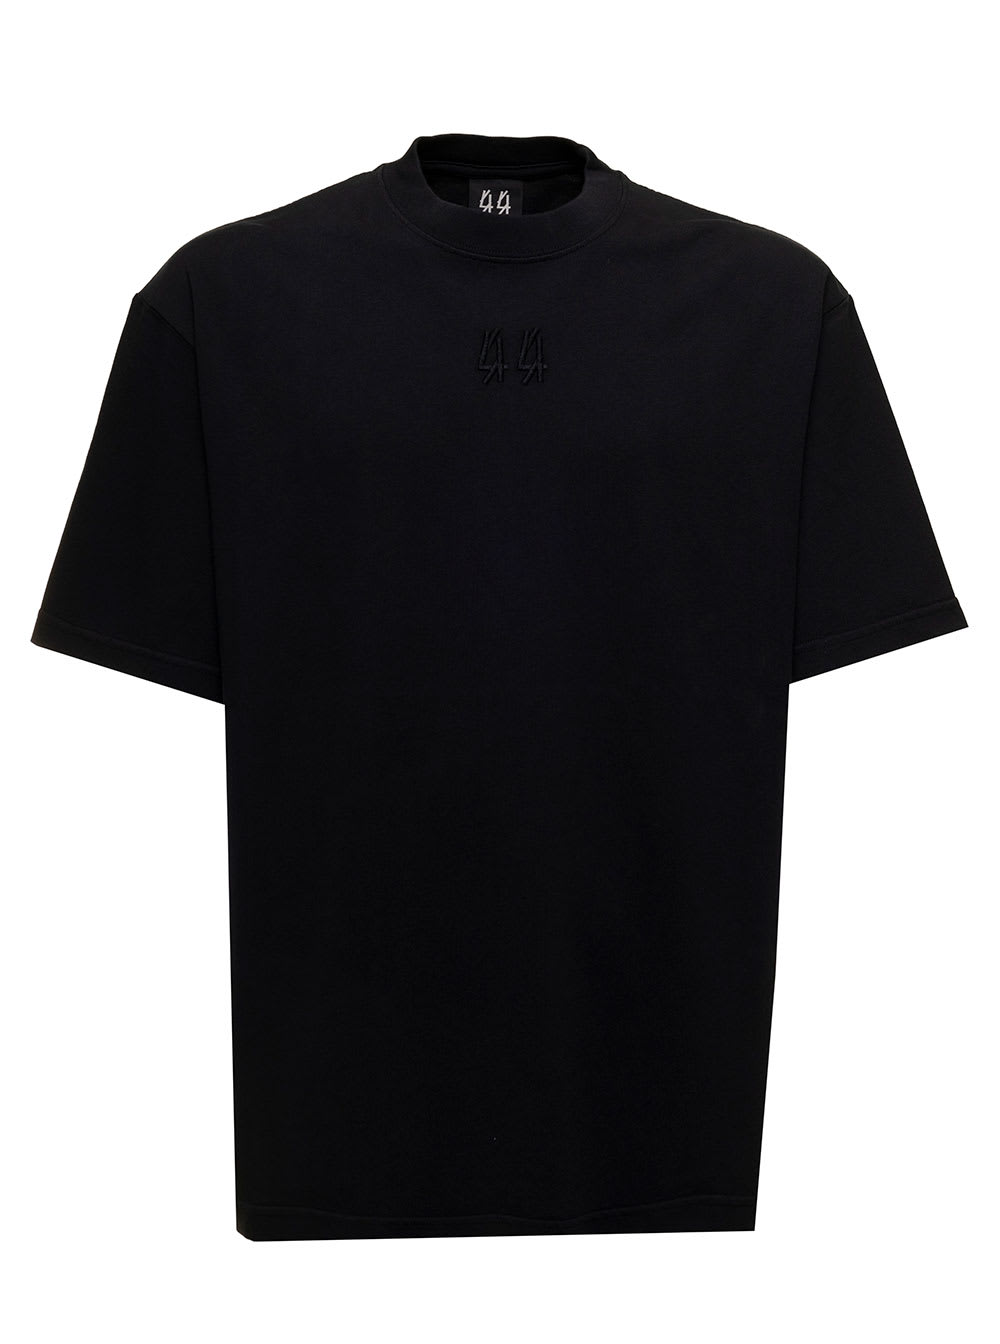 44 Label Group Graphic-print Cotton T-shirt In Black | ModeSens